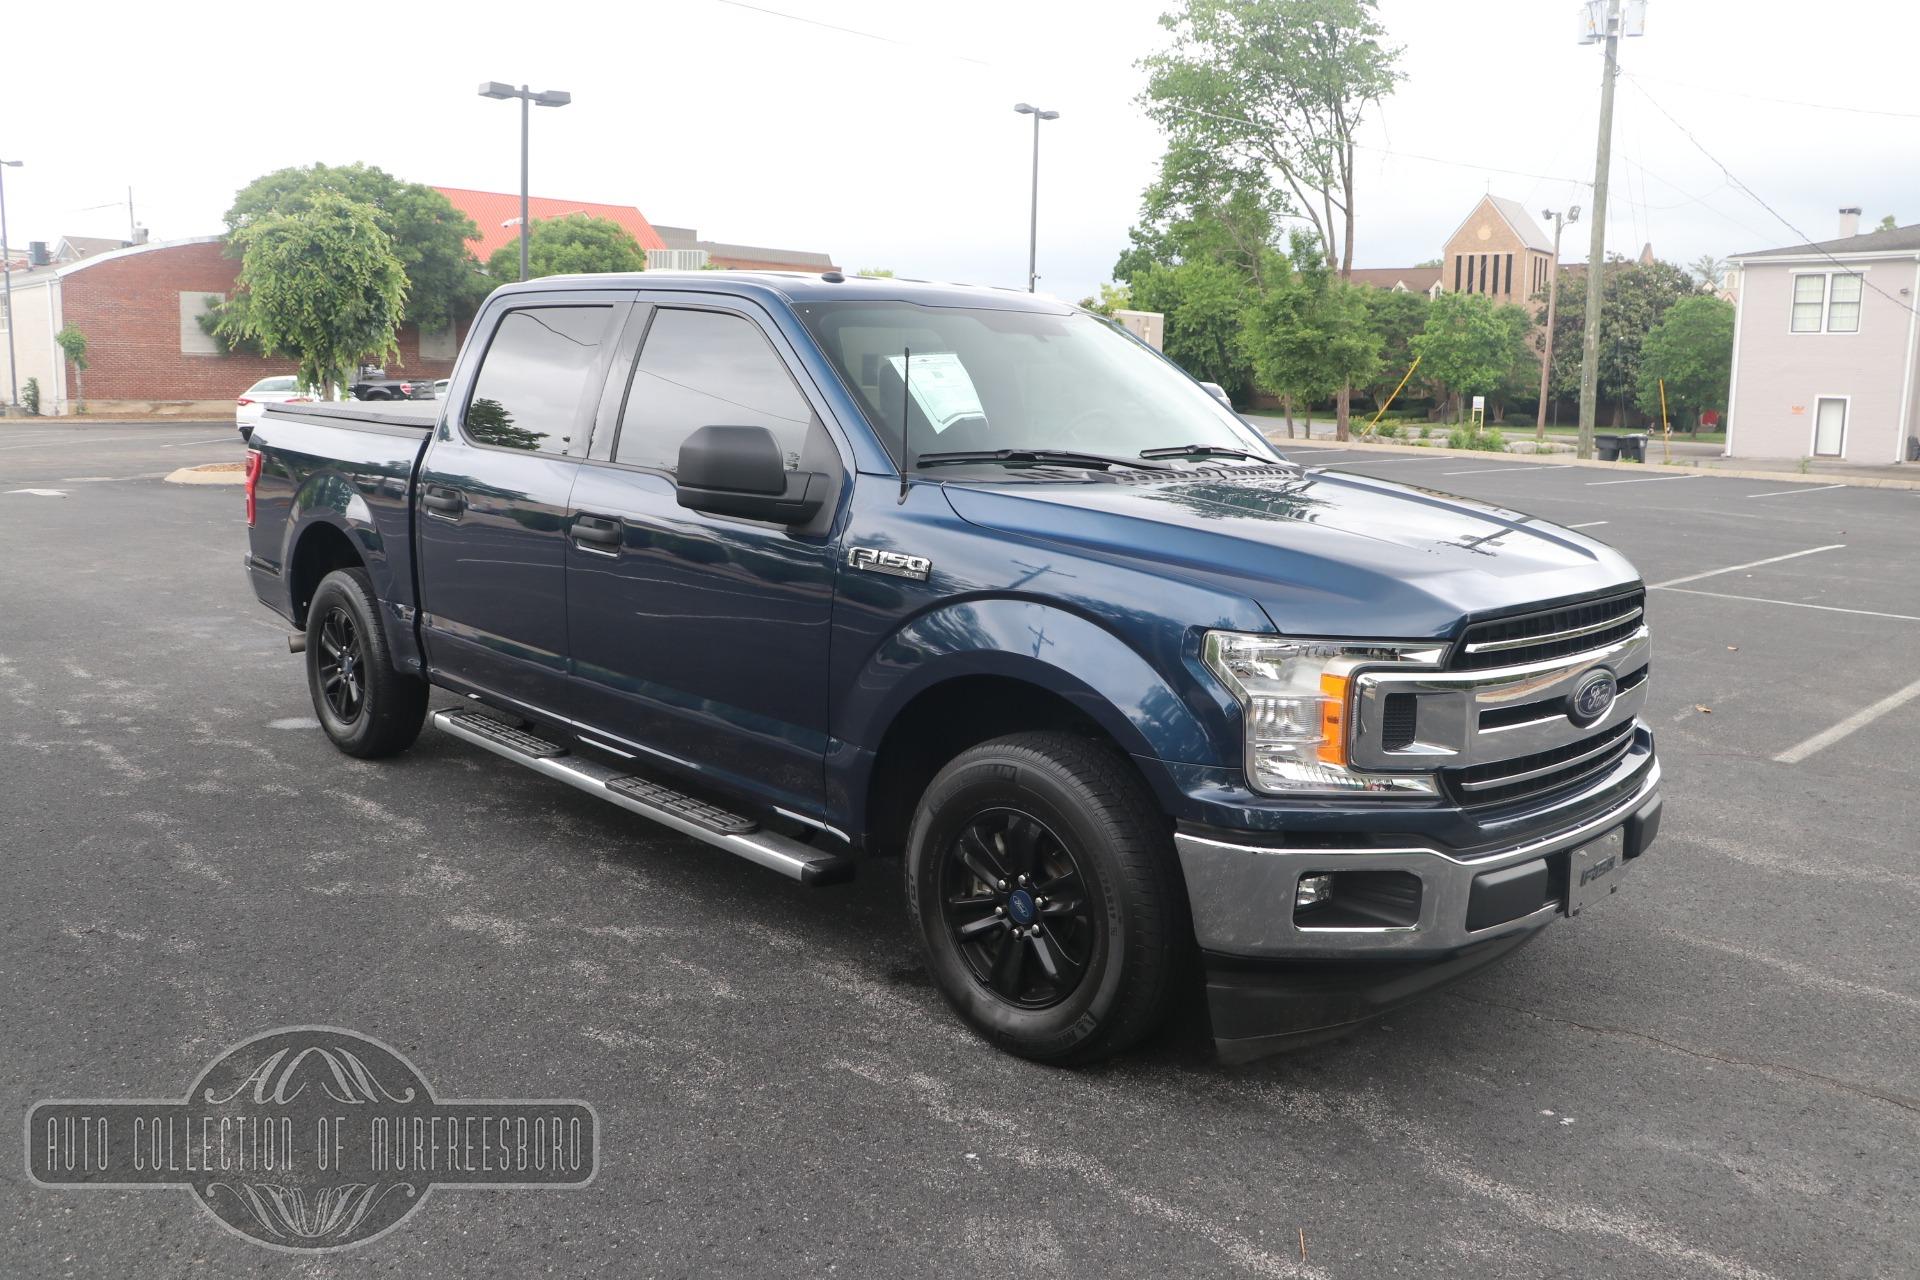 Used 2018 Ford F-150 XLT 4X2 SUPERCREW 145 WHEEL BASE 2.7L ECOBOOST 10 SPEED W/TOW MODE for sale Sold at Auto Collection in Murfreesboro TN 37129 1